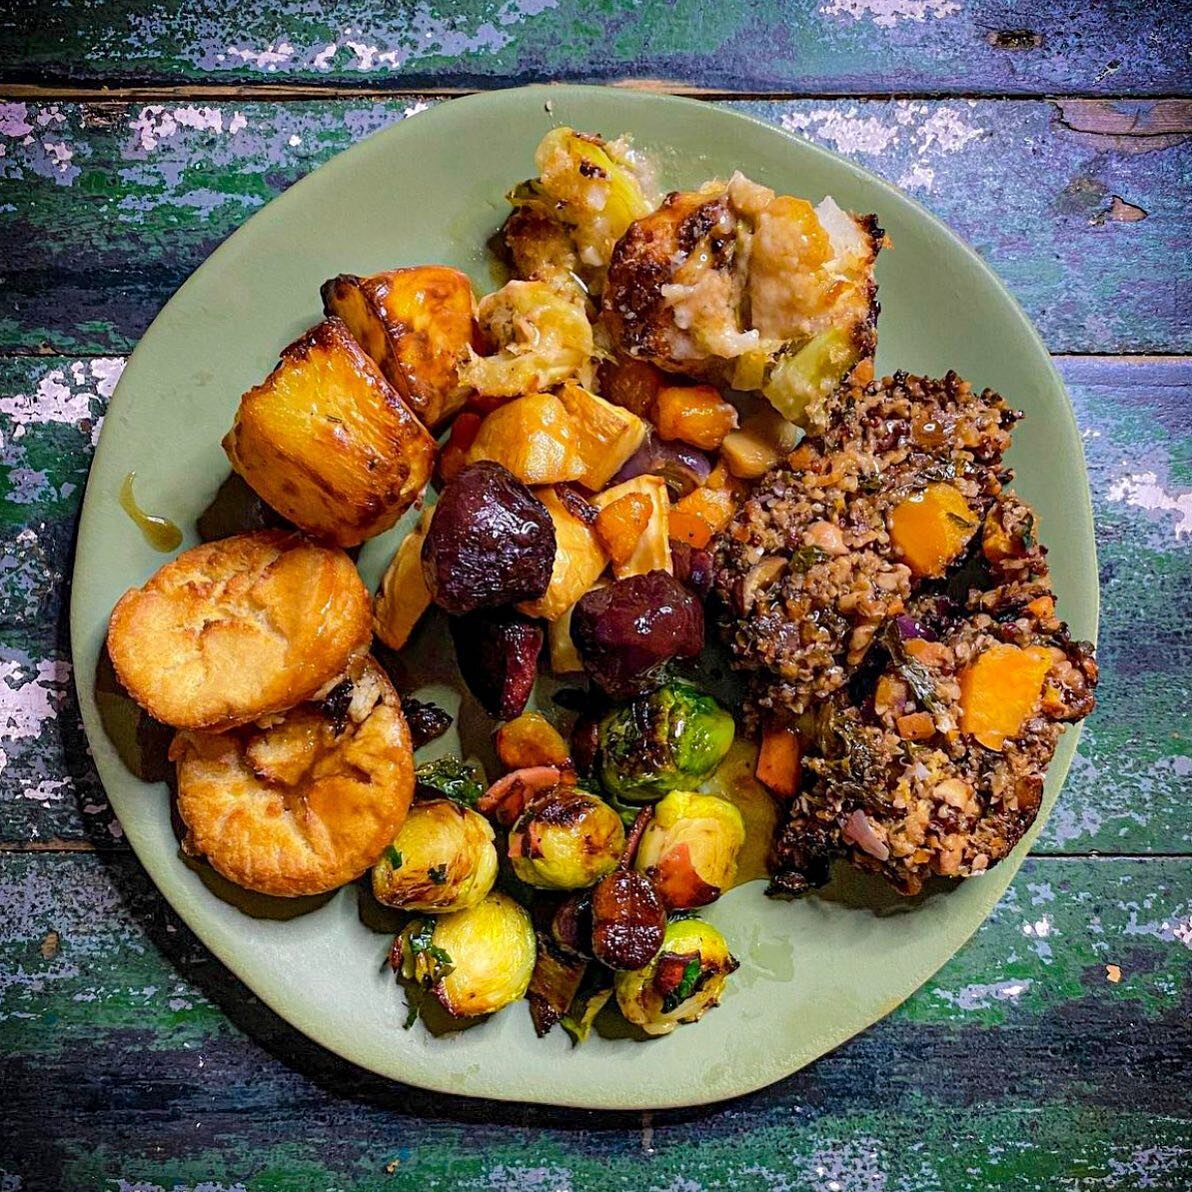 Sunday Roast ☝🏽
.
.
.
It's a been a while since I've made a proper roast dinner + this  was so good ..
.
A new 'Nut Roast' recipe made with grains, nuts, squash + chestnuts. I also tried out a new Yorkshire pud recipe which tasted the best I've ever